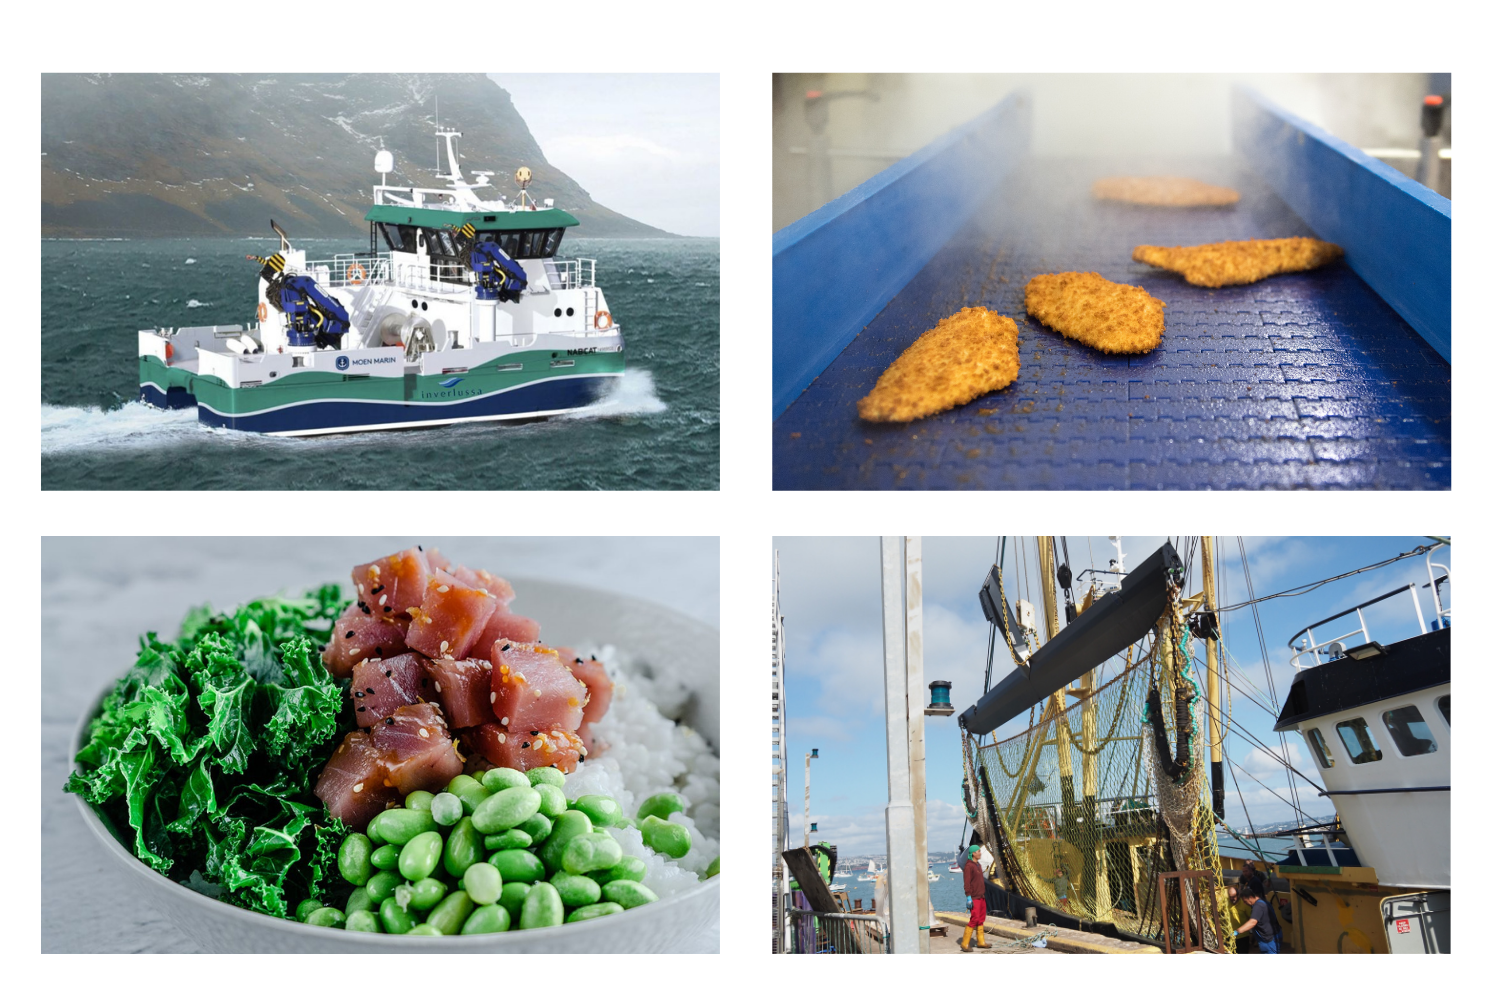 A selection of photos from case studies - hybrid vessel, breaded fish processing, super frozen tuna and fishing gear